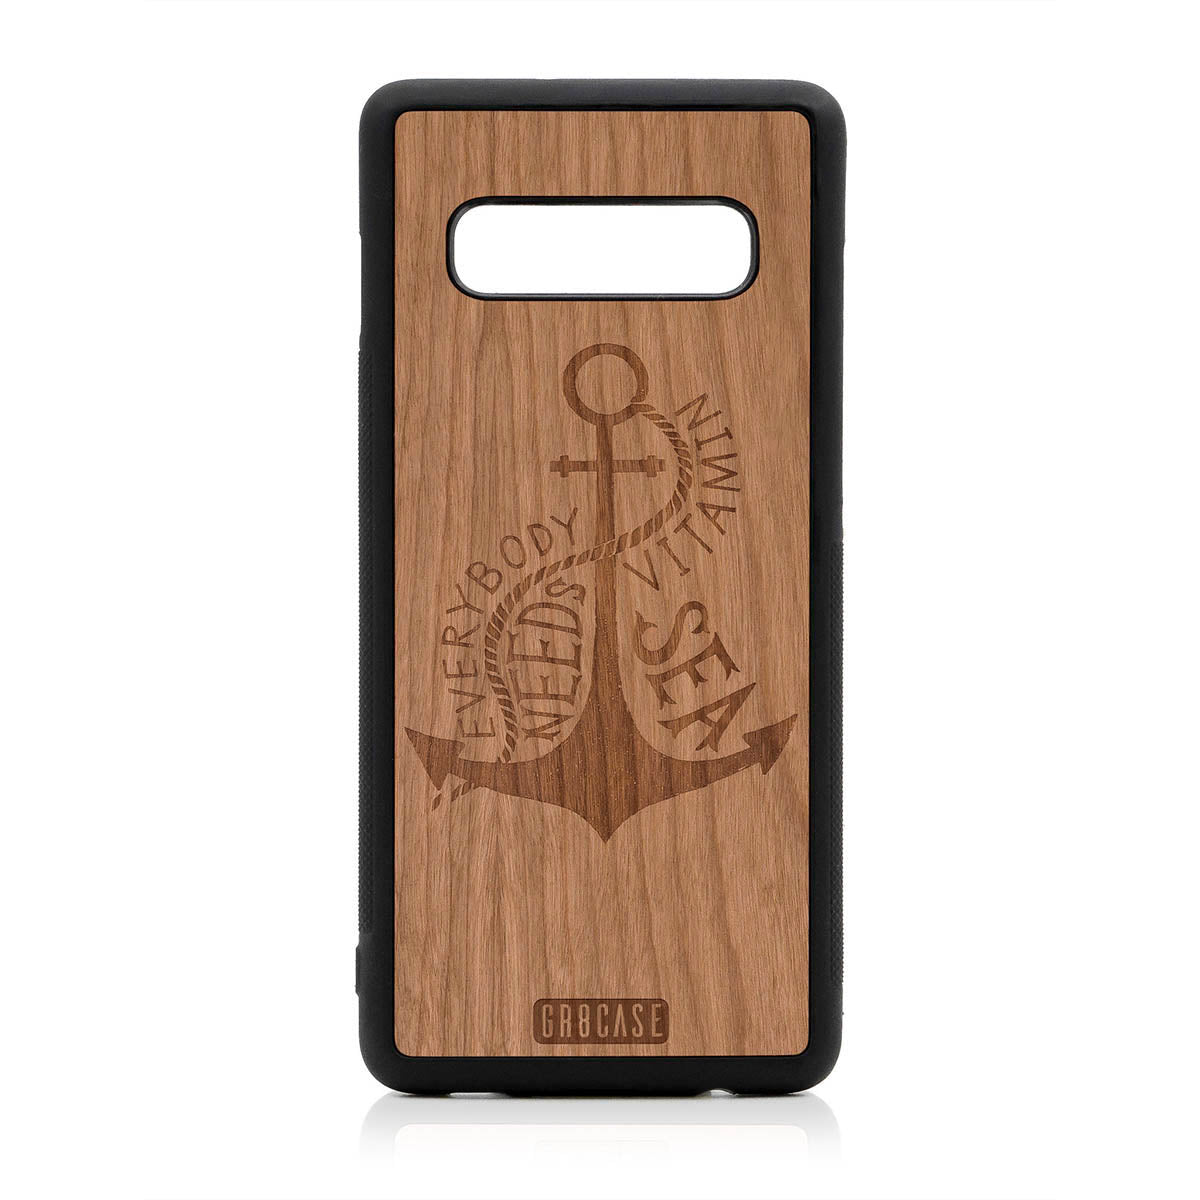 Everybody Needs Vitamin Sea (Anchor) Design Wood Case For Samsung Galaxy S10 Plus by GR8CASE